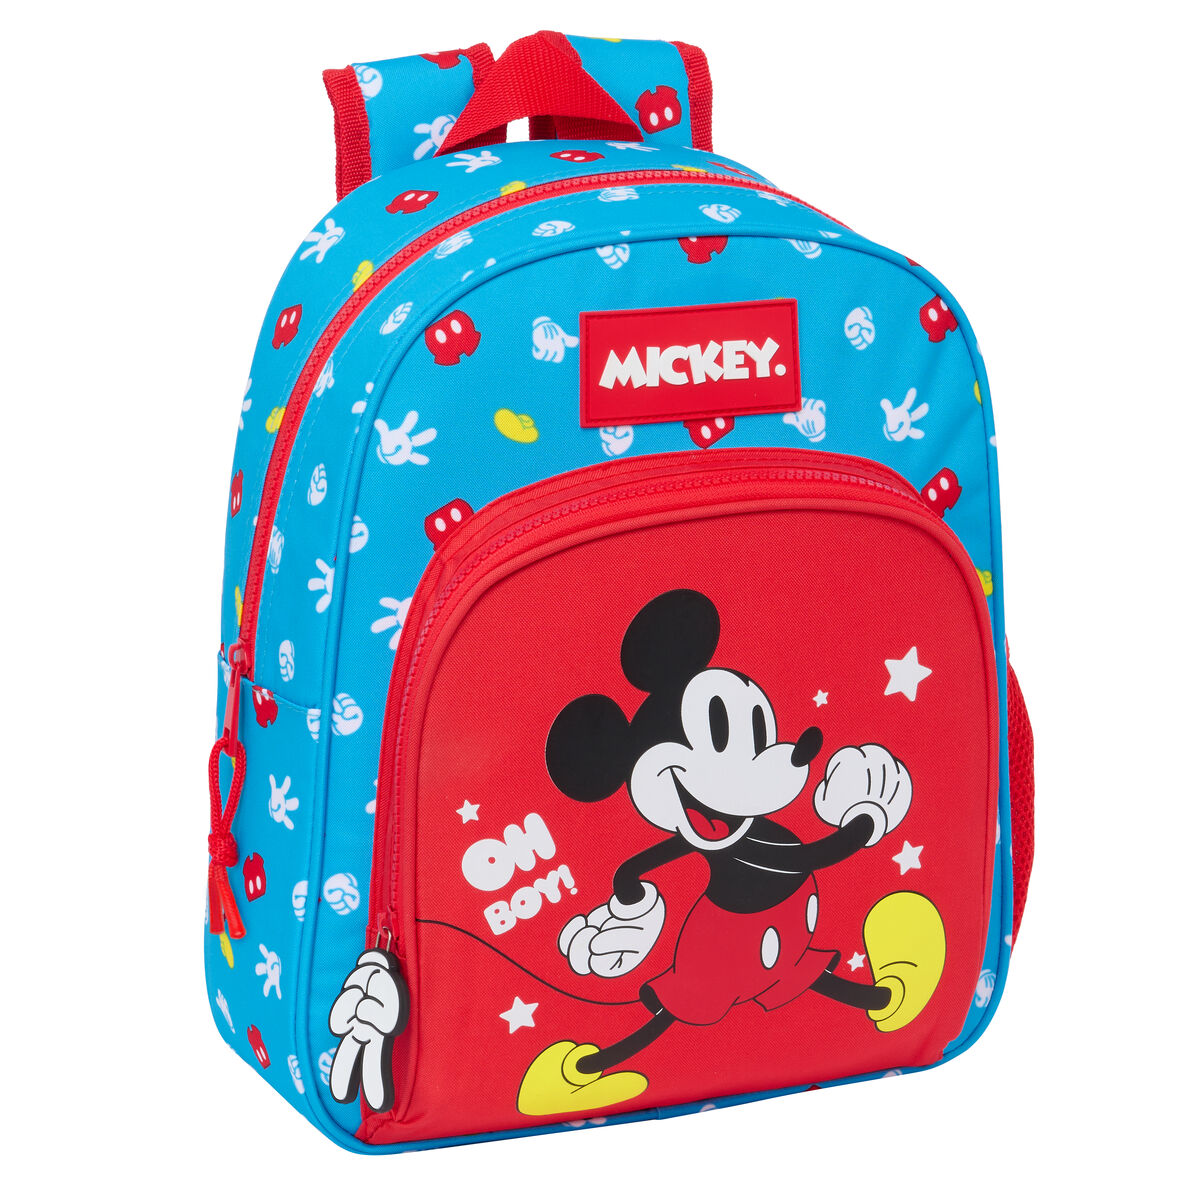 Cartable Mickey Mouse Clubhouse Fantastic Bleu Rouge 28 x 34 x 10 cm